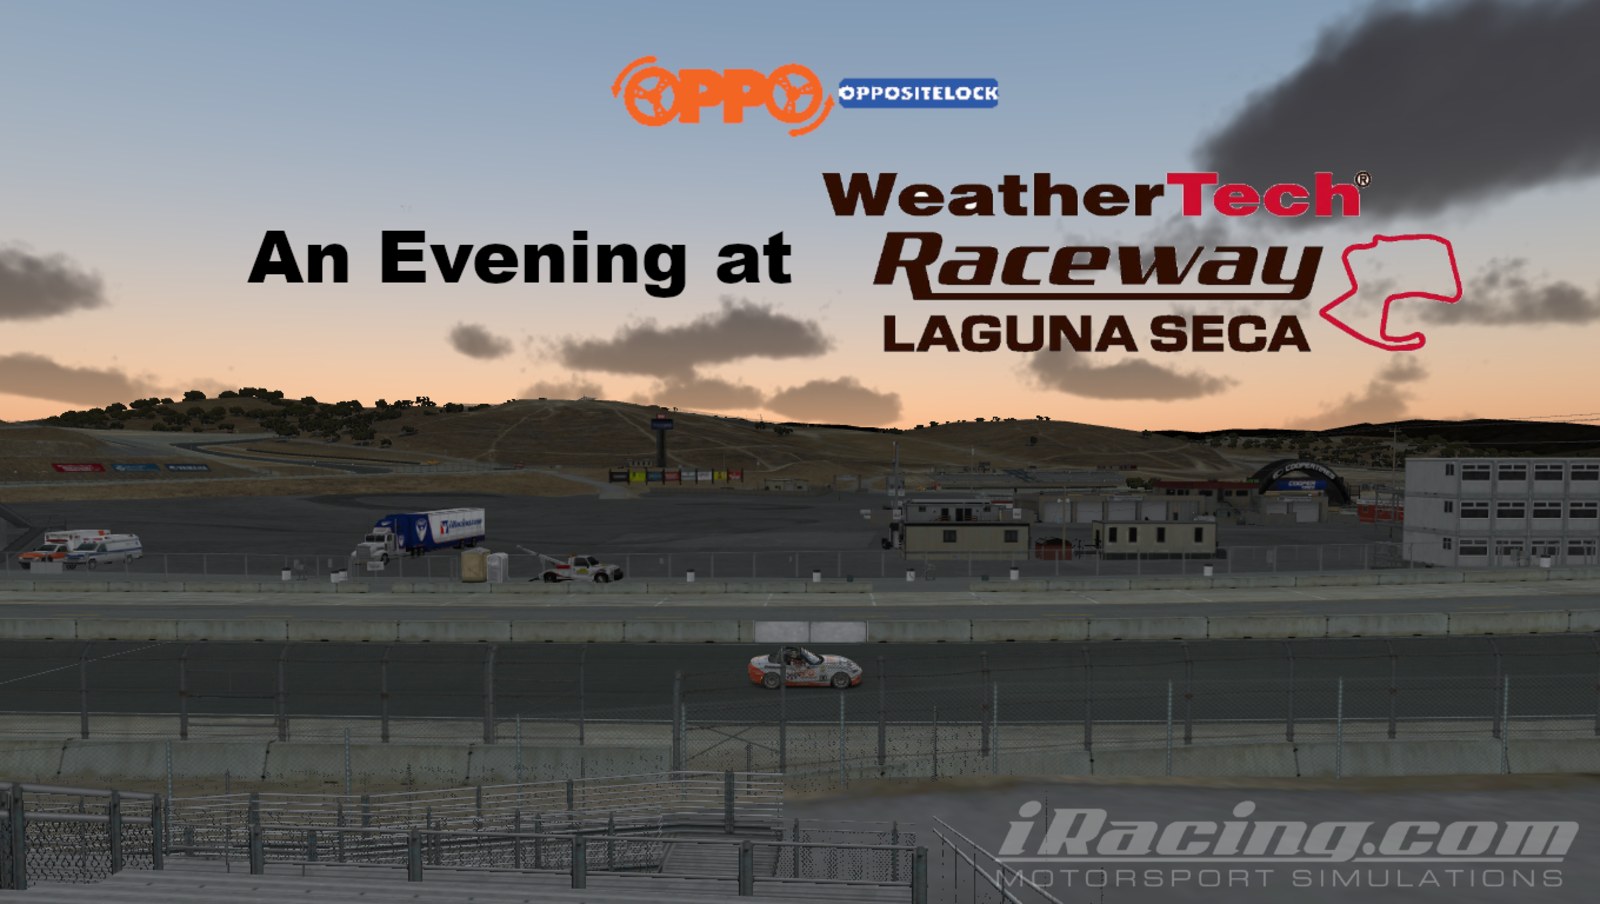 Illustration for article titled An Evening at Laguna Seca - 2018 Oppositelock Miata Championship - Round 3 Preview